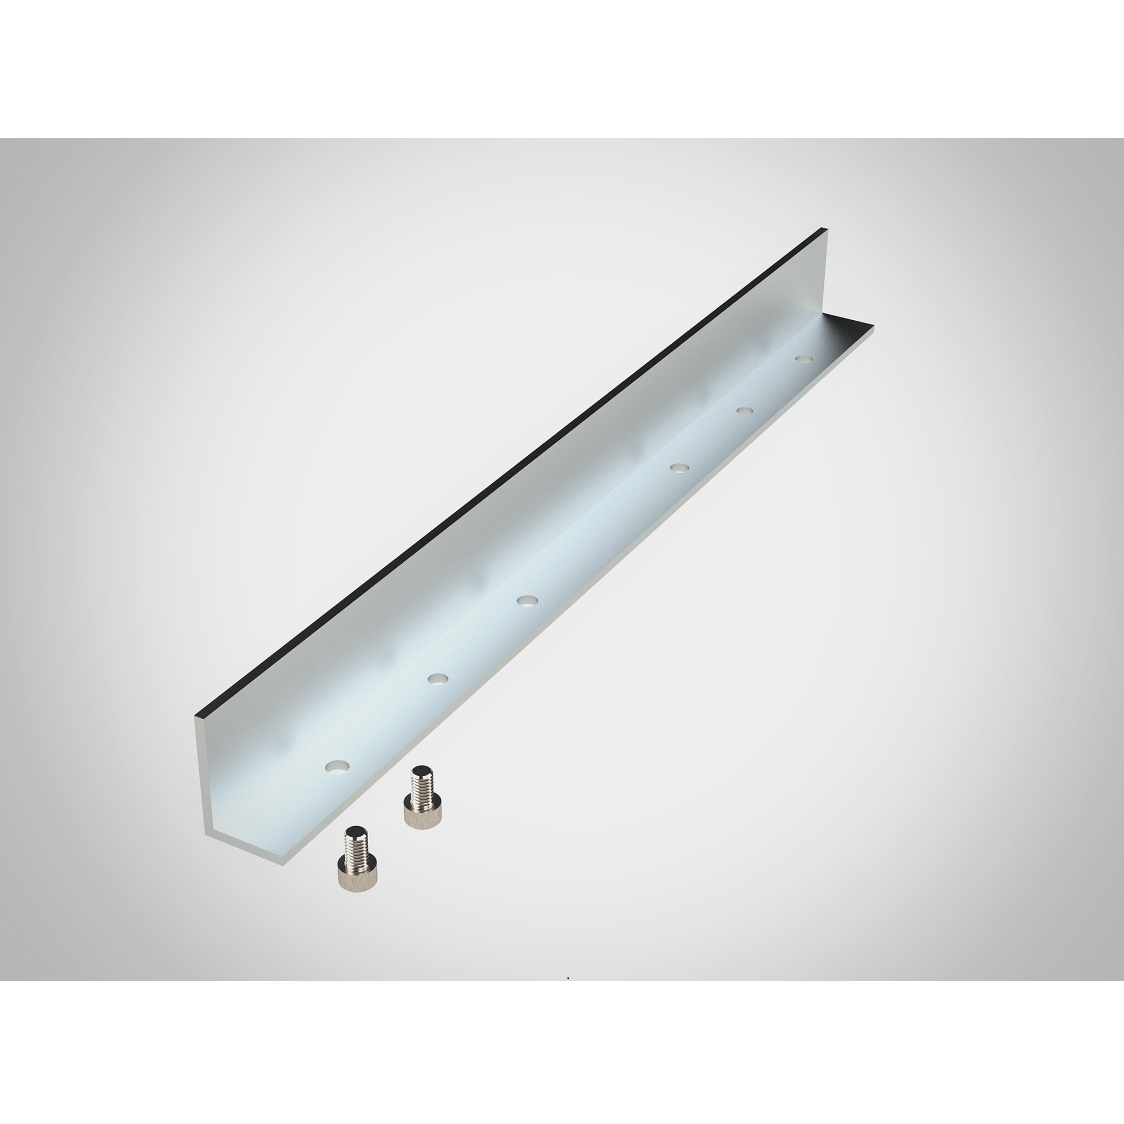 The Long Angle Accessory has 2 stainless steel socket head screws for mounting to a Guide Rail Square or Precision Triangle.